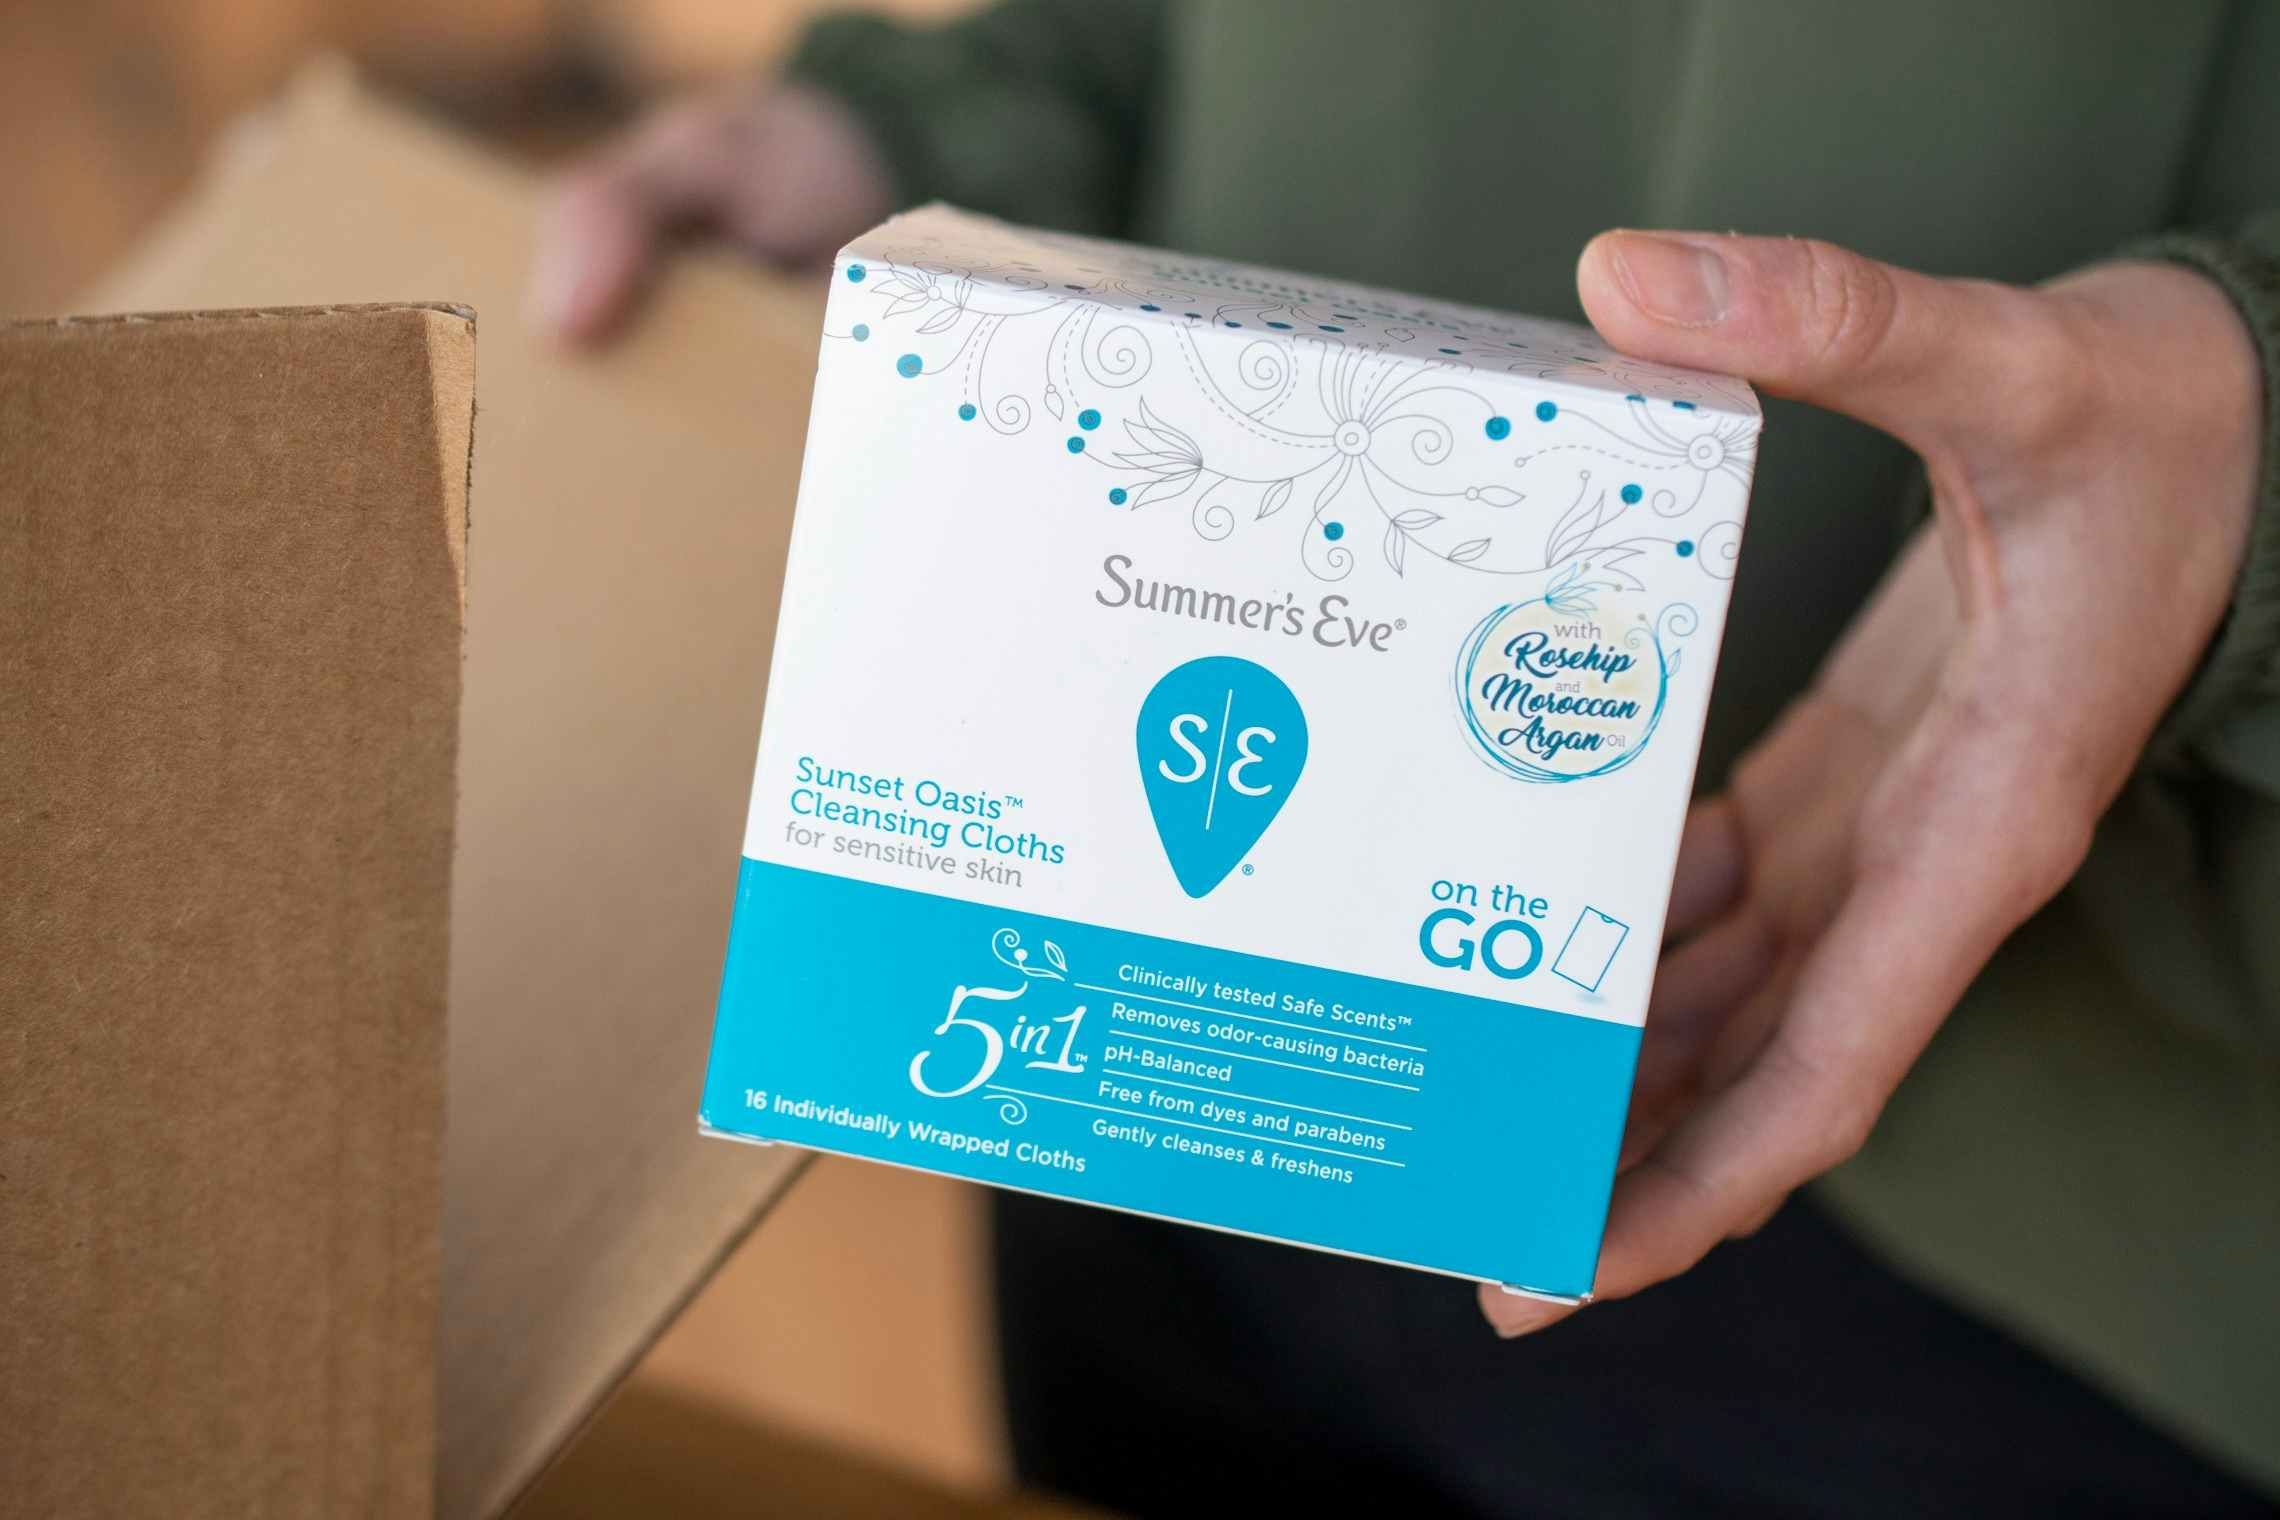 Summer's Eve Feminine Wipes: Get 3 Packs for as Low as $3.13 on Amazon